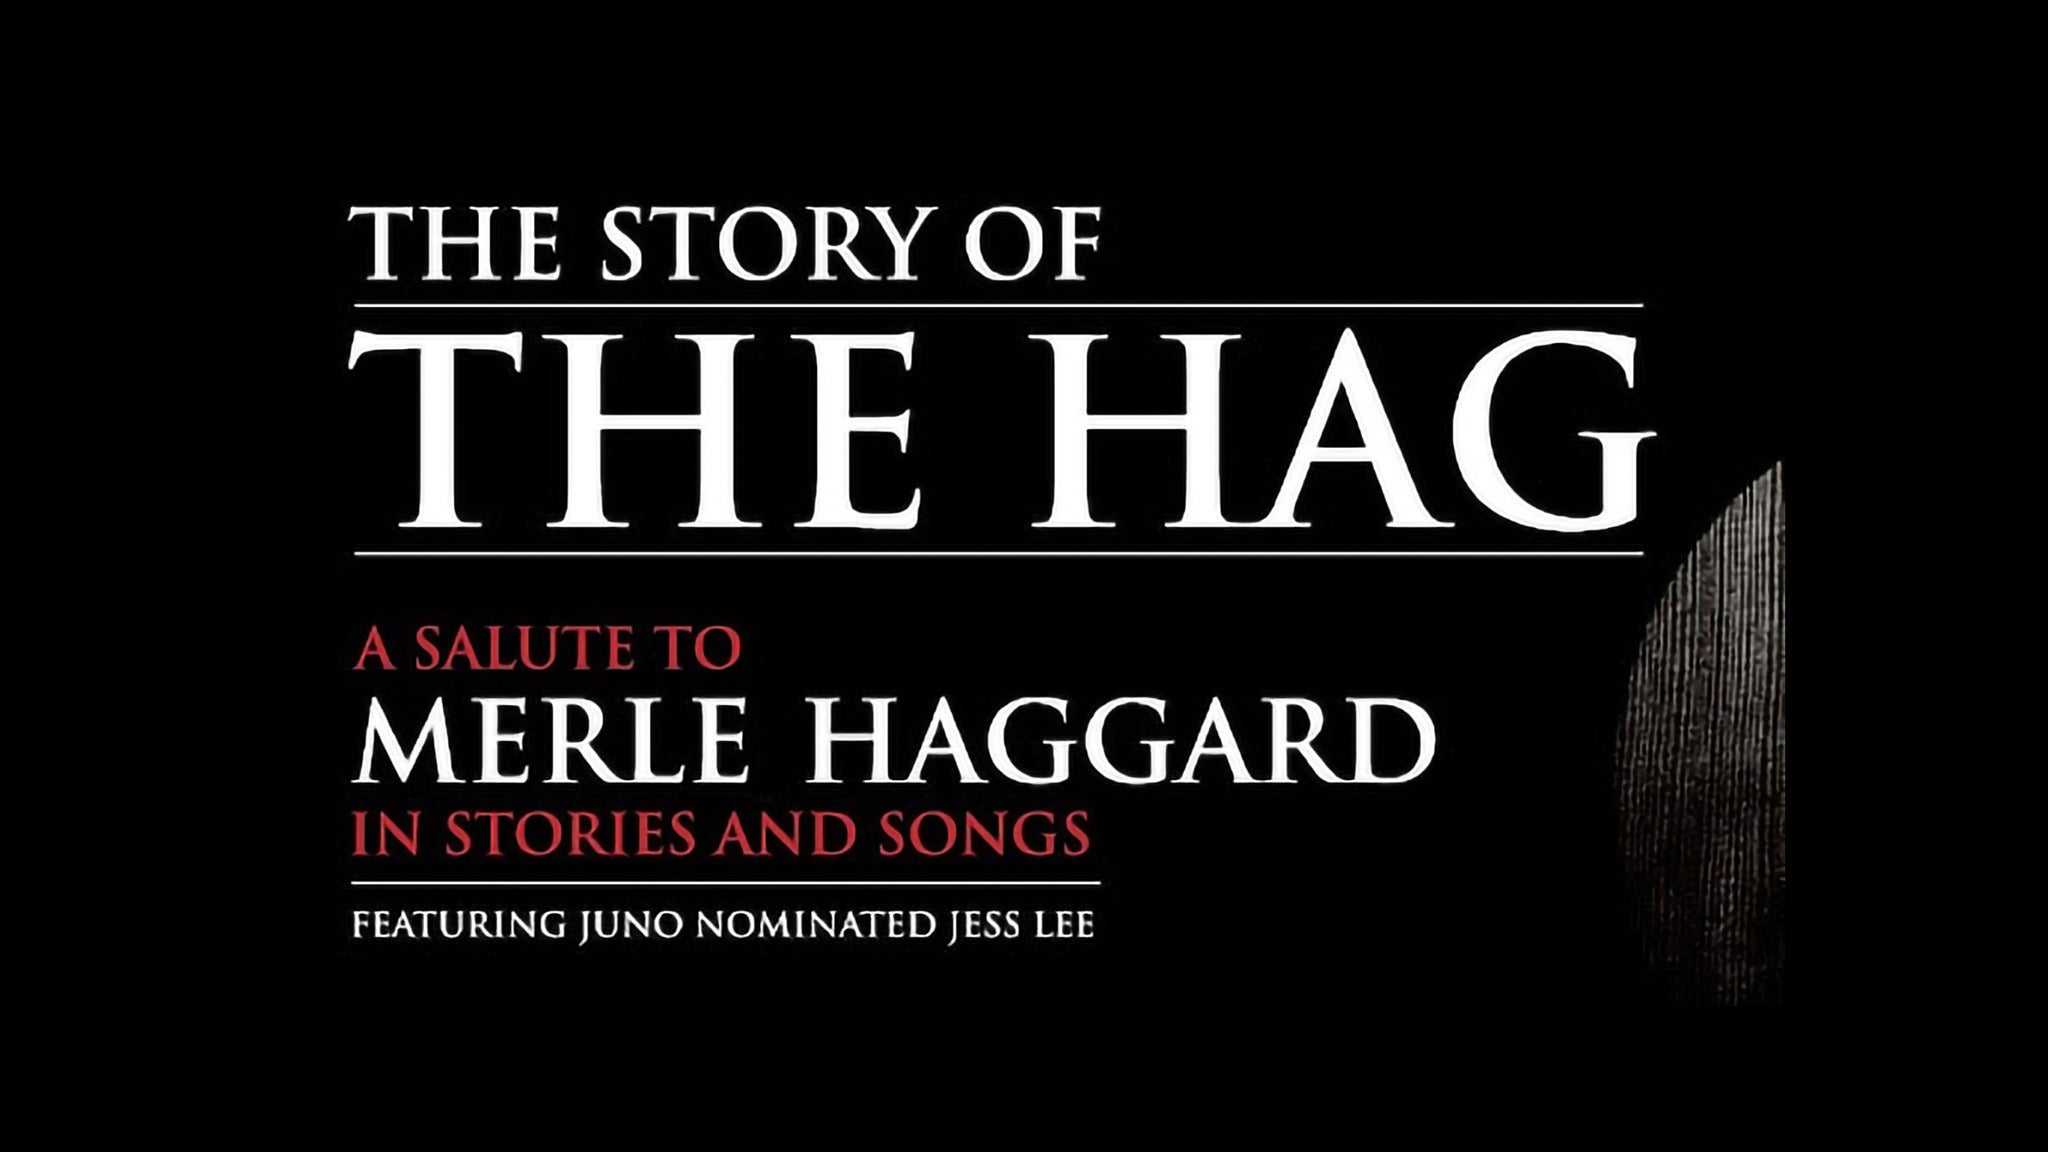 The Story of the Hag - featuring Jess Lee presale information on freepresalepasswords.com